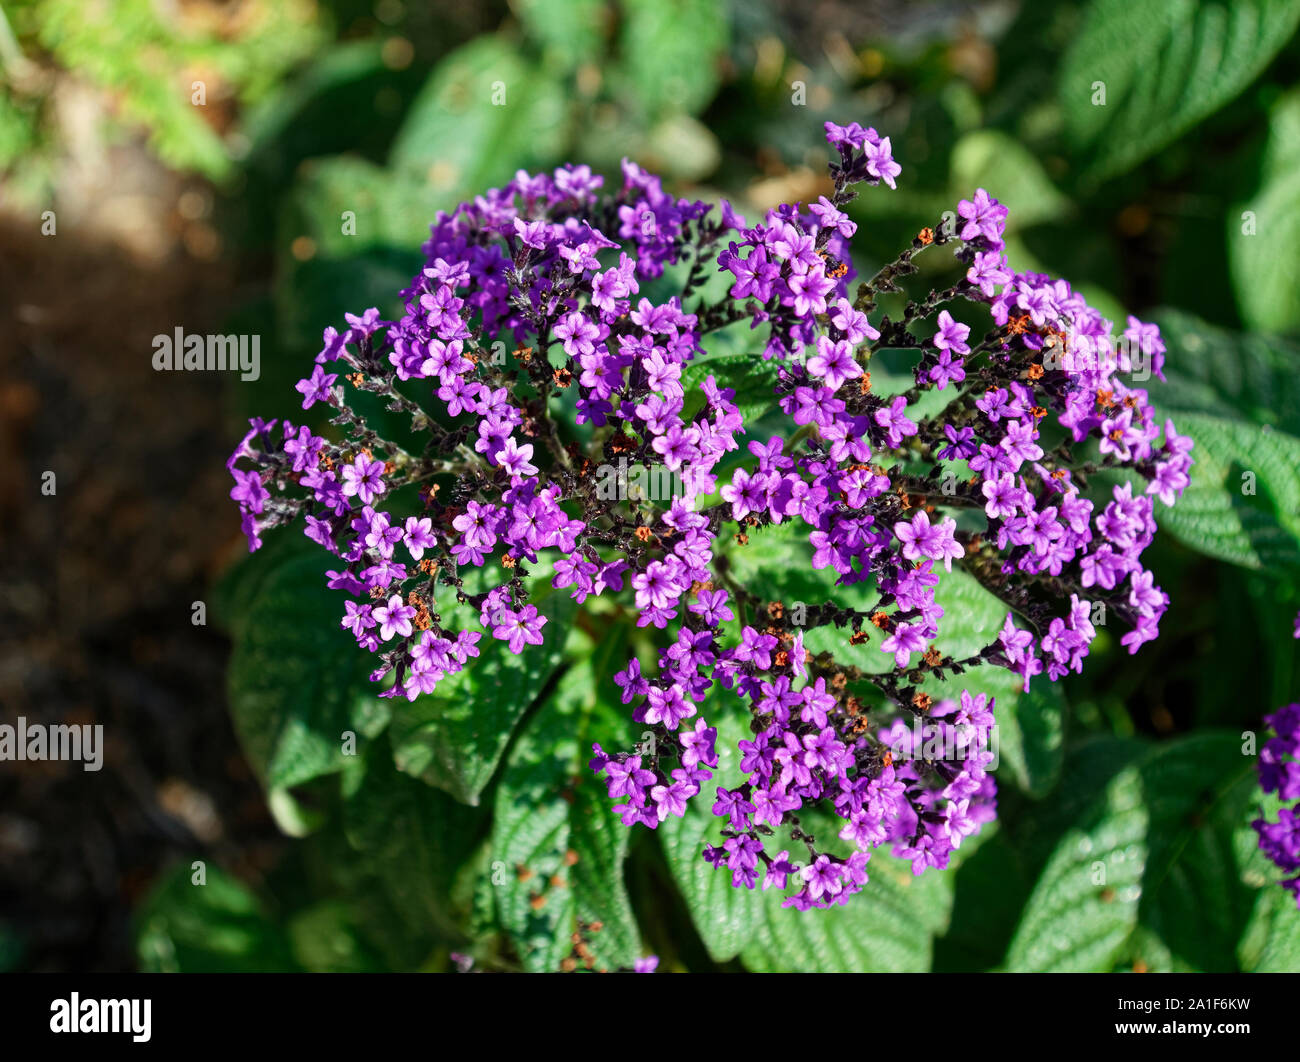 Heliotrope, purple cultivated flower, green leaves, nature, garden, many tiny blossoms clustered, Boraginaceae family, summer; horizontal Stock Photo